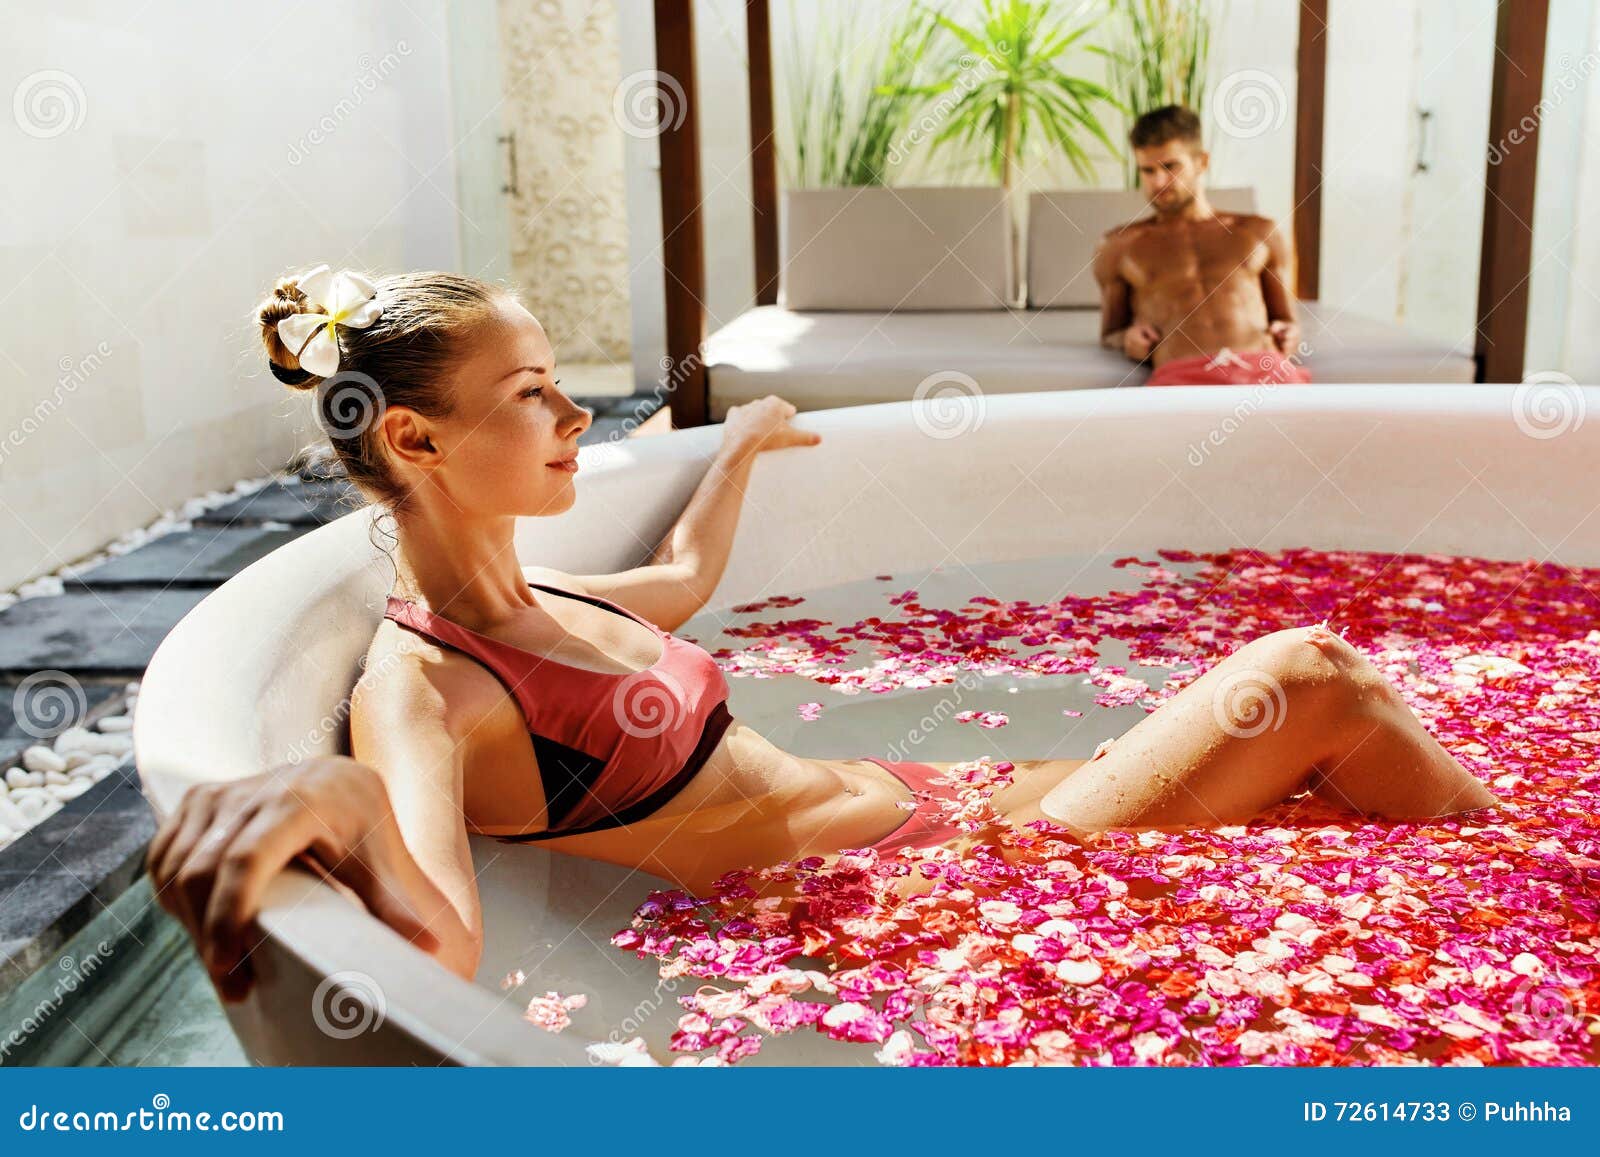 Woman in Flower Bath at Day Spa Salon Stock Image photo